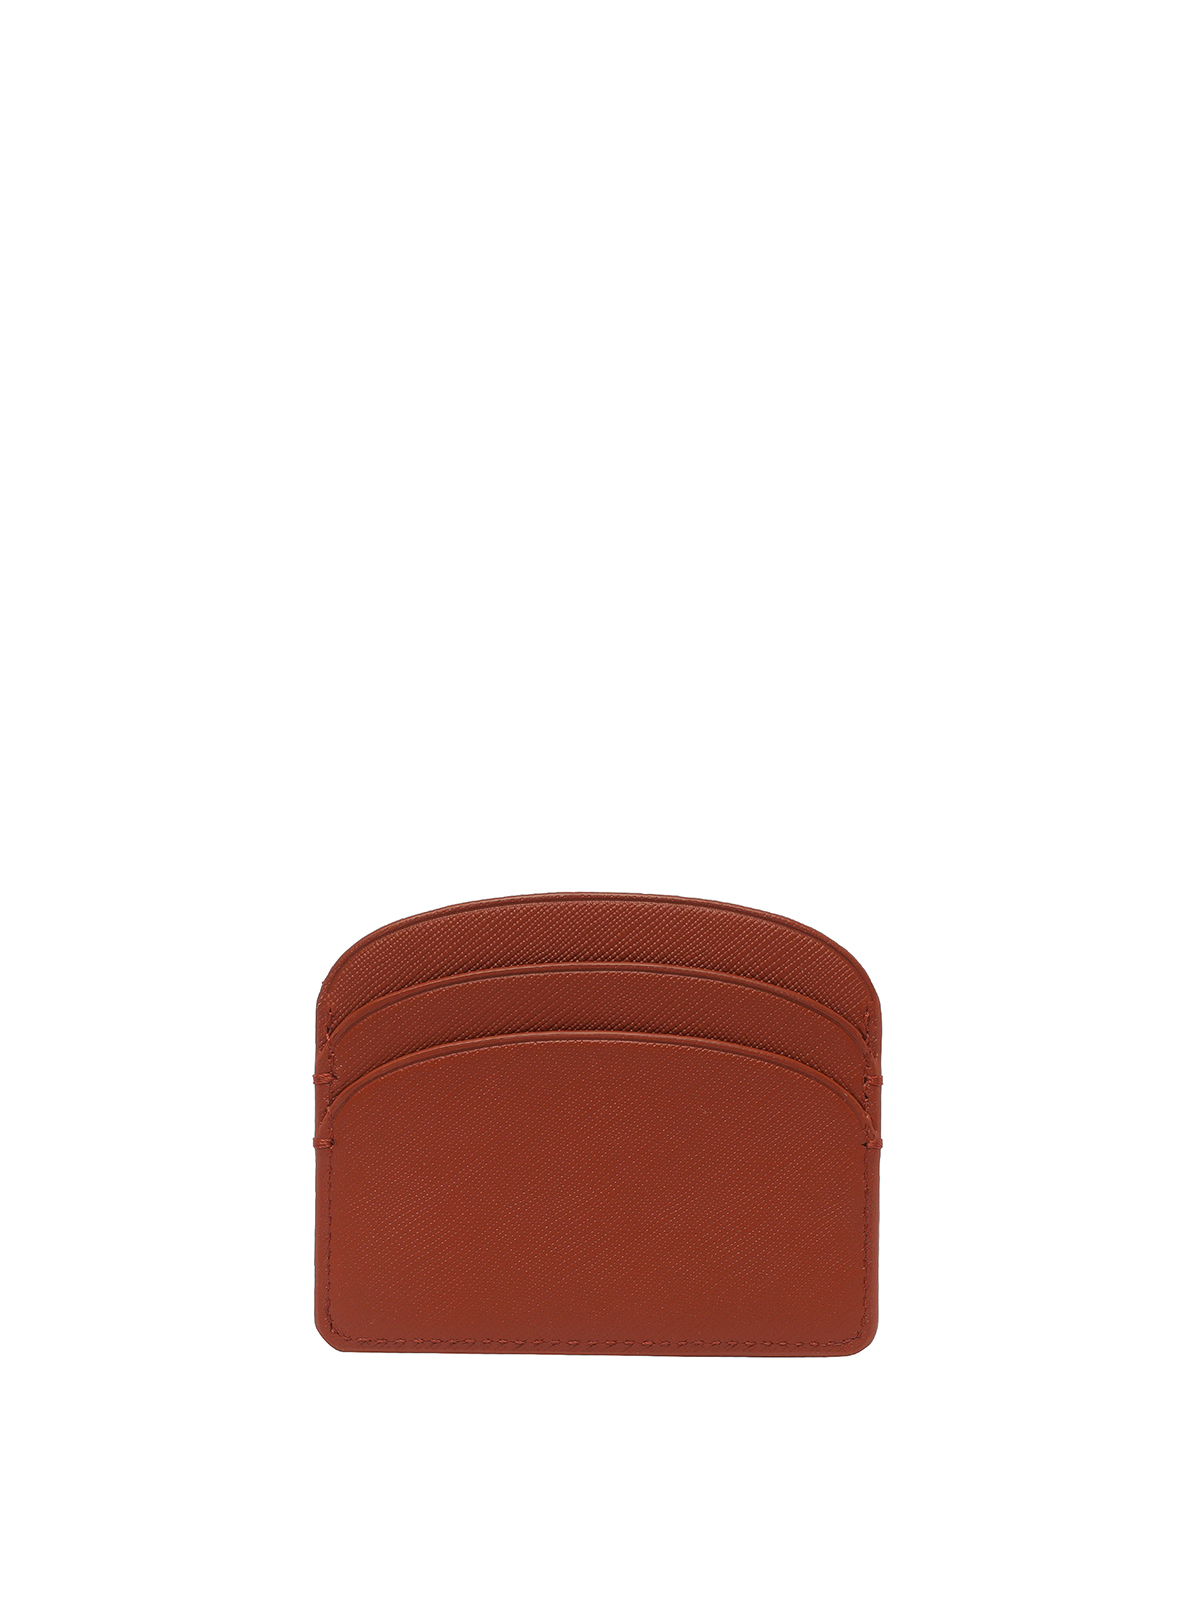 Shop Apc Leather Cardholder With Slots And Logo In Brown